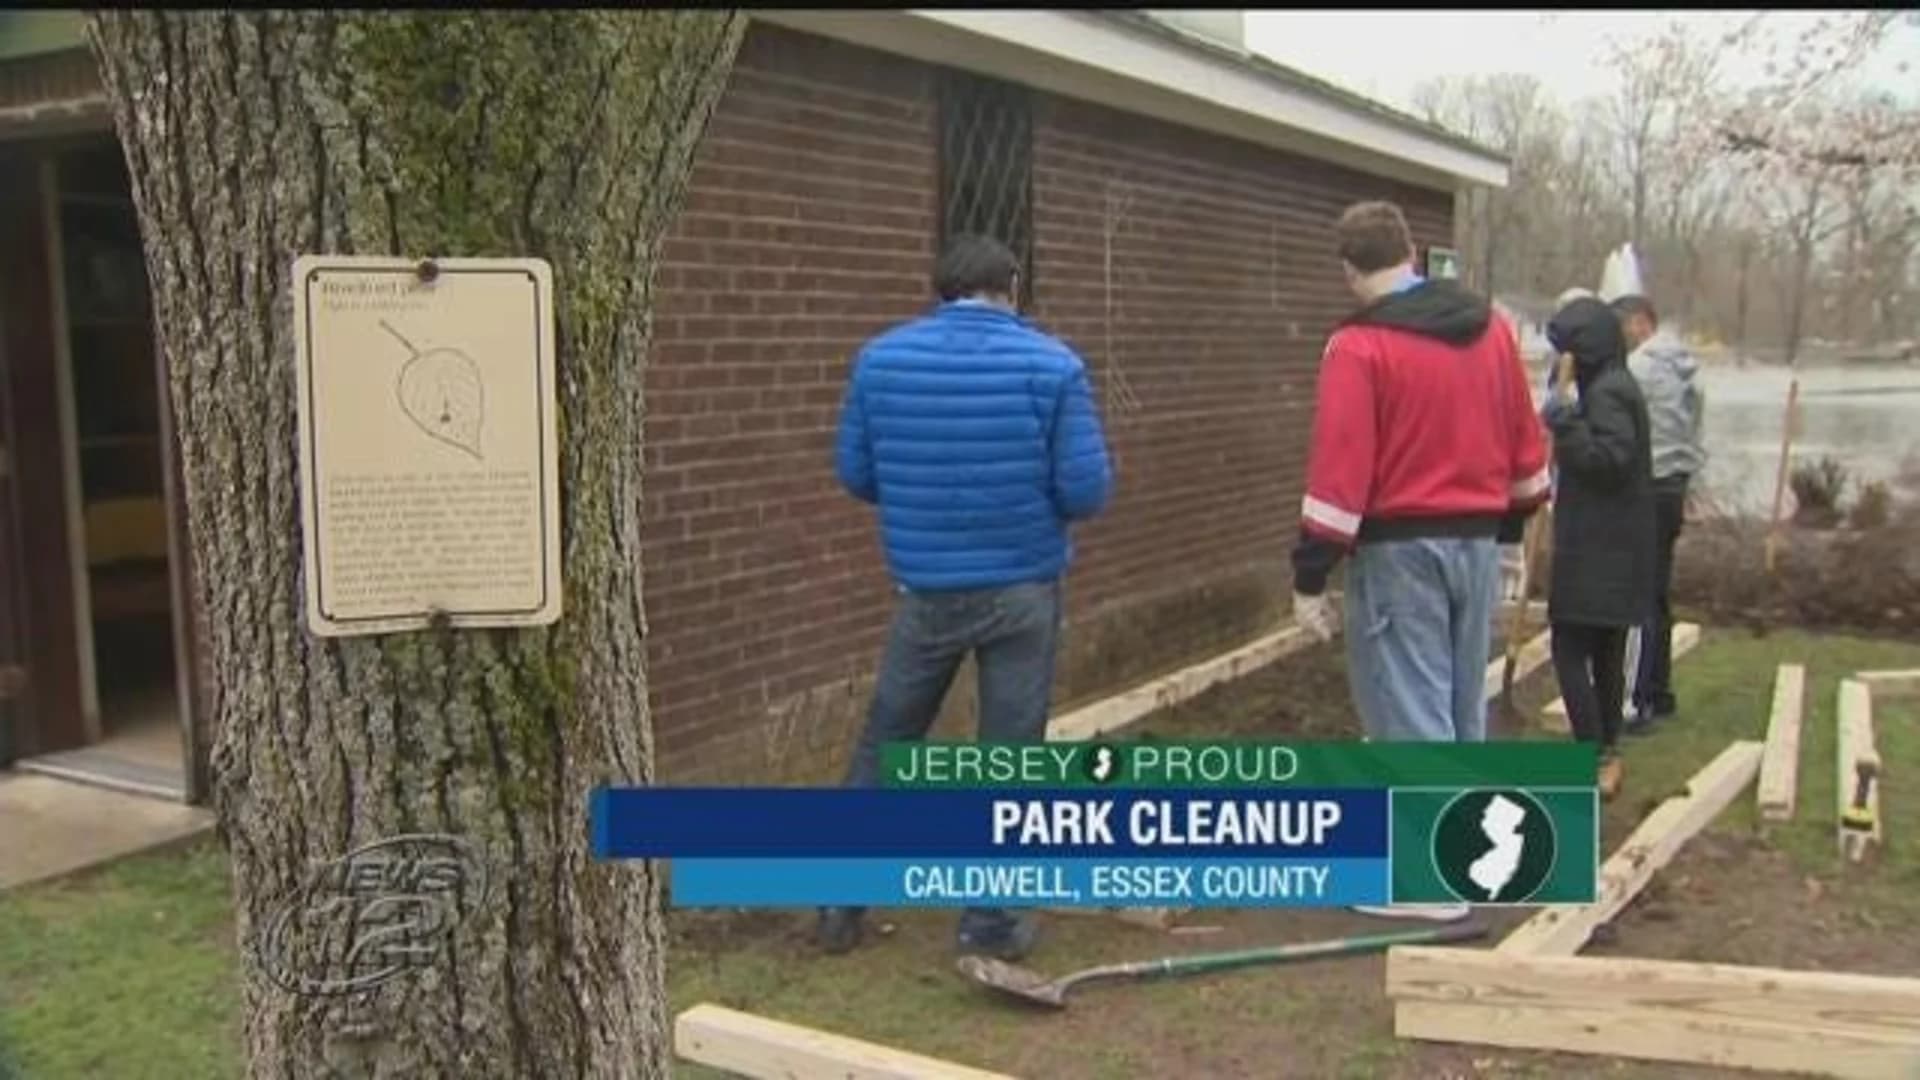 Volunteers help clean up Caldwell park for Earth Day